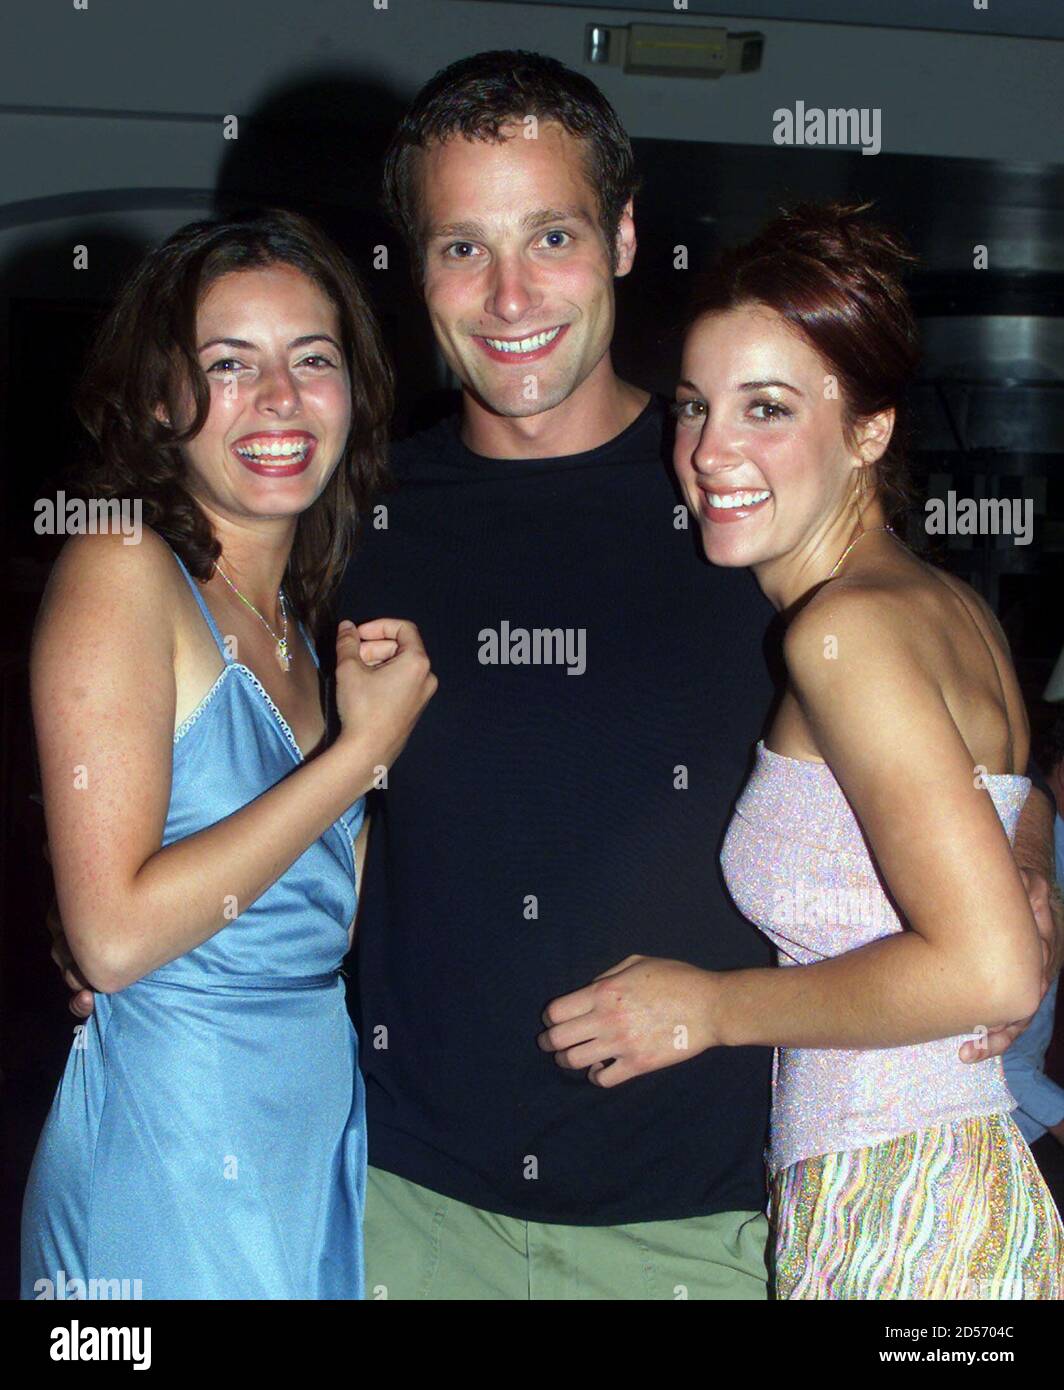 'Grosse Point' cast members Irene Molloy (L), Kohl Sudduth, and Lindsay Sloane (R) pose together during WB's Summer press tour party in Pasadena July 24, 2000. The comedy series takes a  behind-the-scenes  look at the actors in a ficticious prime time melodrama. The party introduced the stars of WB's fall televison season to television writers from around the United States. Stock Photo